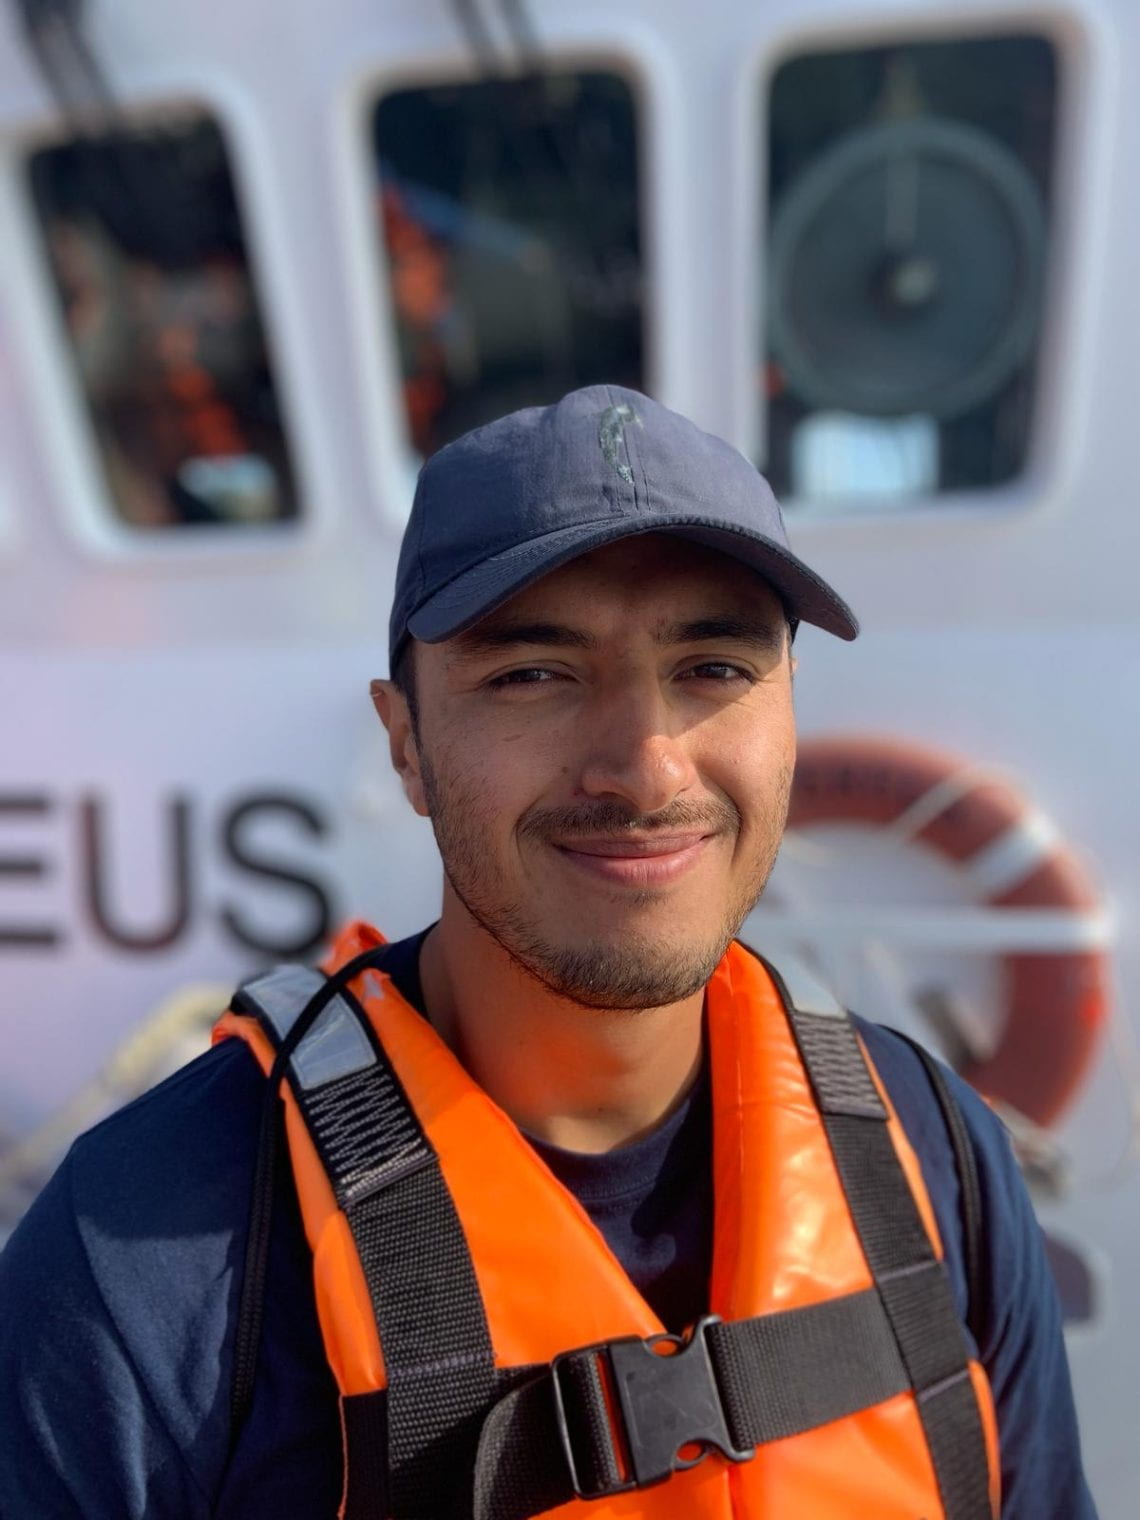 David Carraso (USF MSEM ‘22), who won the 2022 Joseph Petulla Award for Outstanding Environmental Management Student and is now conducting coral reef research at the University of Queensland in Australia